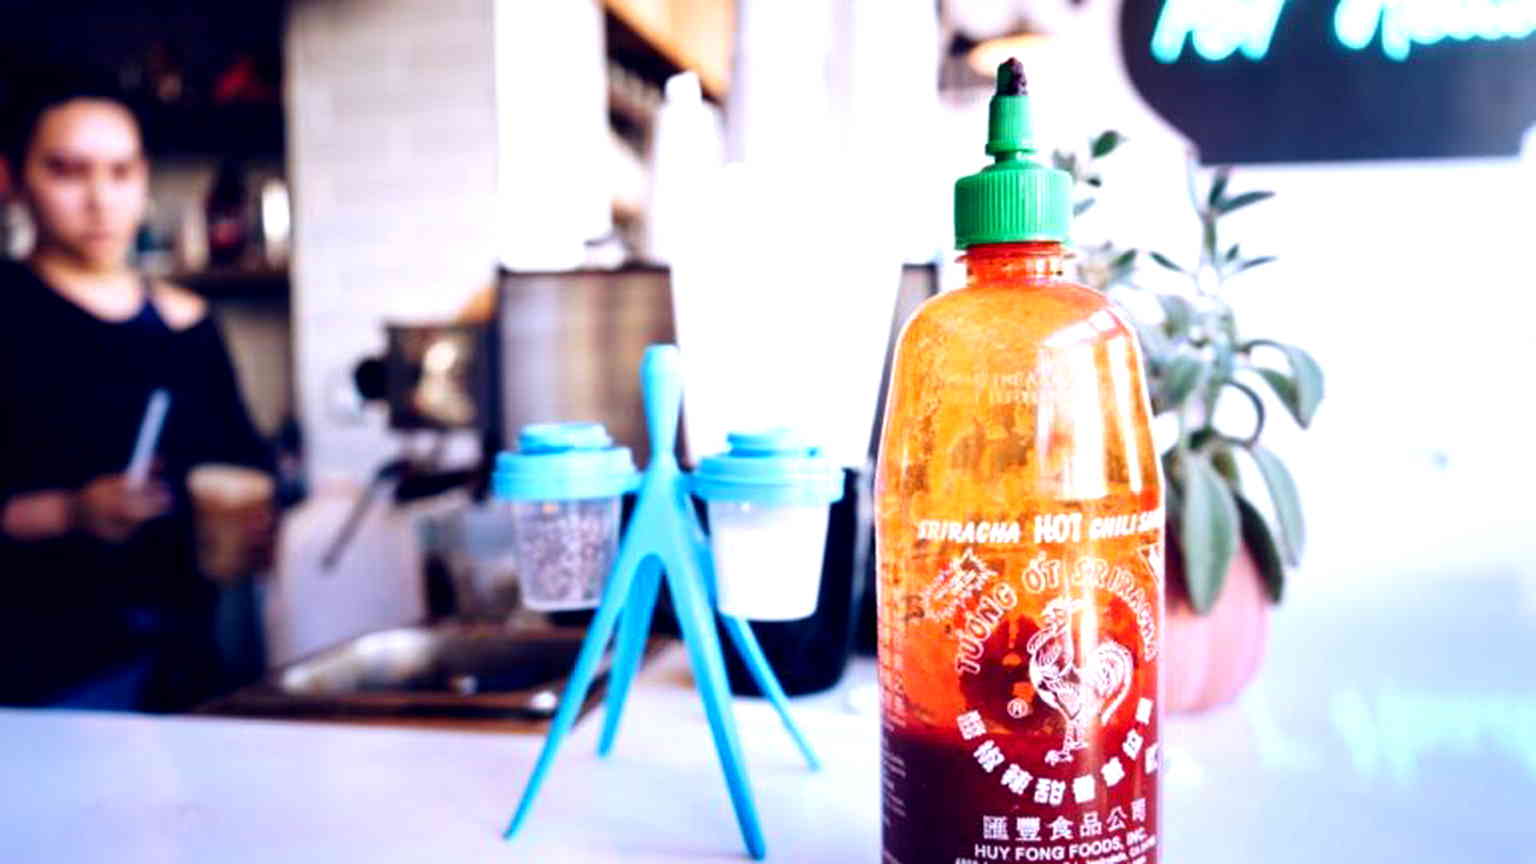 Sriracha bottles ‘disappear’ from SF restaurant as shortage causes condiment’s price to reach $30